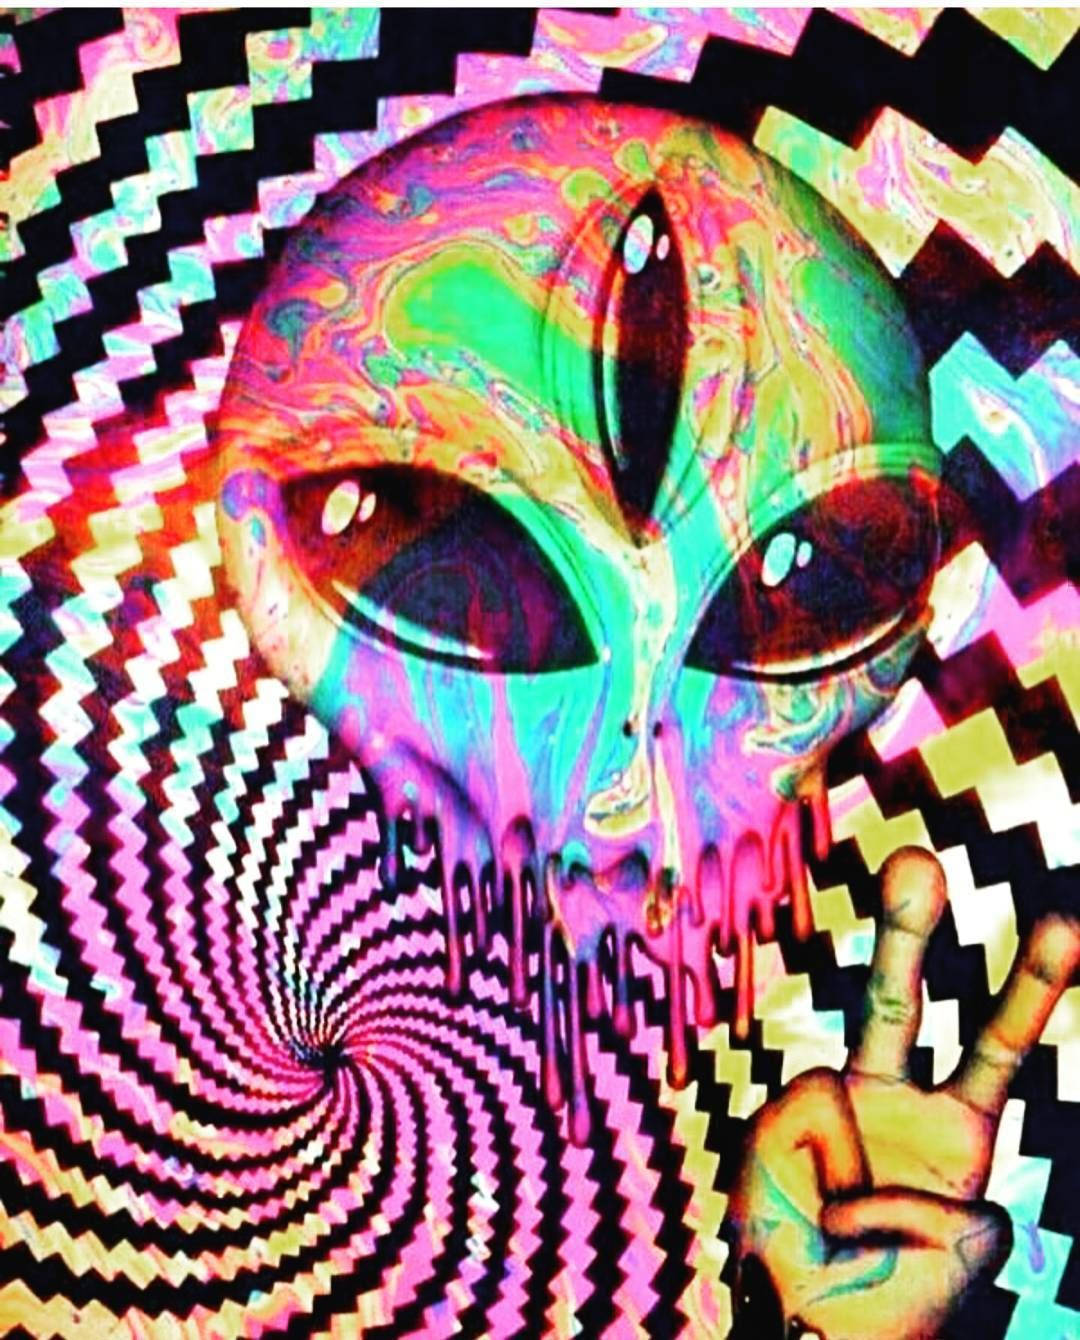 Blast off with True Psychedelic Power! Wallpaper